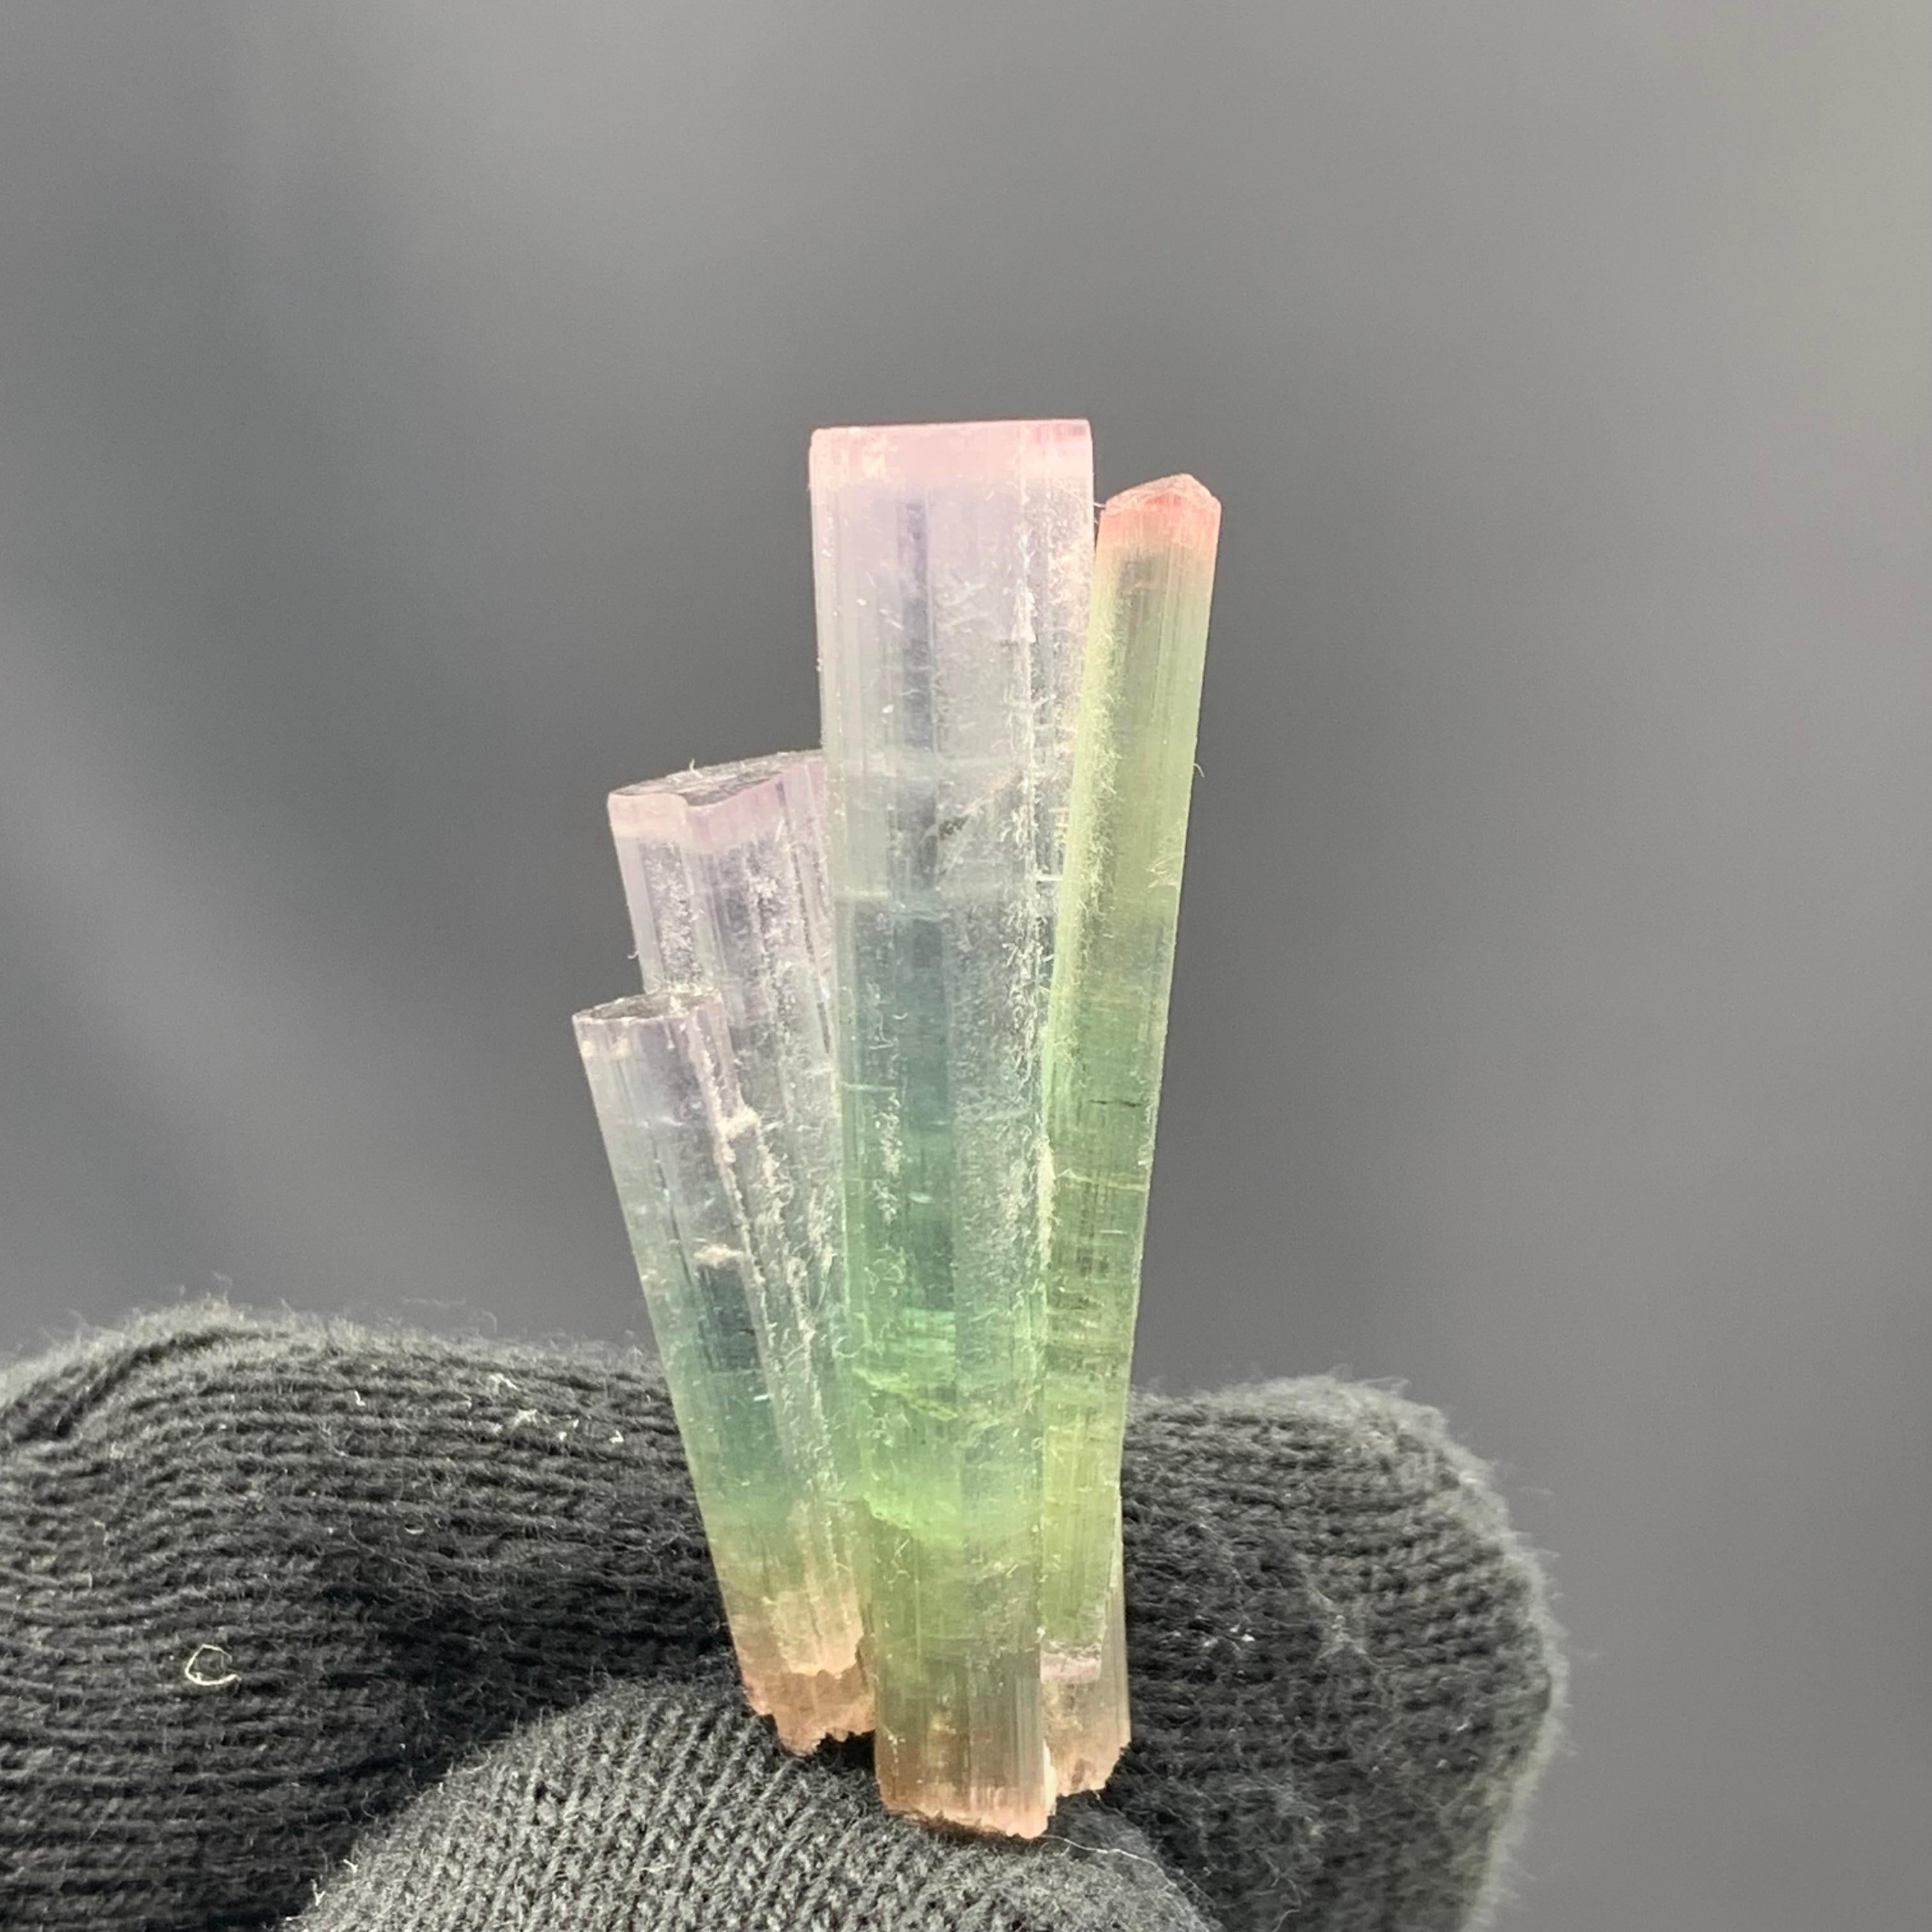 6.82 Gram Pink Cap Tri Color Tourmaline Crystal Bunch From Paprook, Afghanistan 

Weight: 6.82 Gram 
Dimension: 3.7 x 1.9 x 0.9 Cm
Origin: Paprook Mine, Afghanistan 

Tourmaline is a crystalline silicate mineral group in which boron is compounded